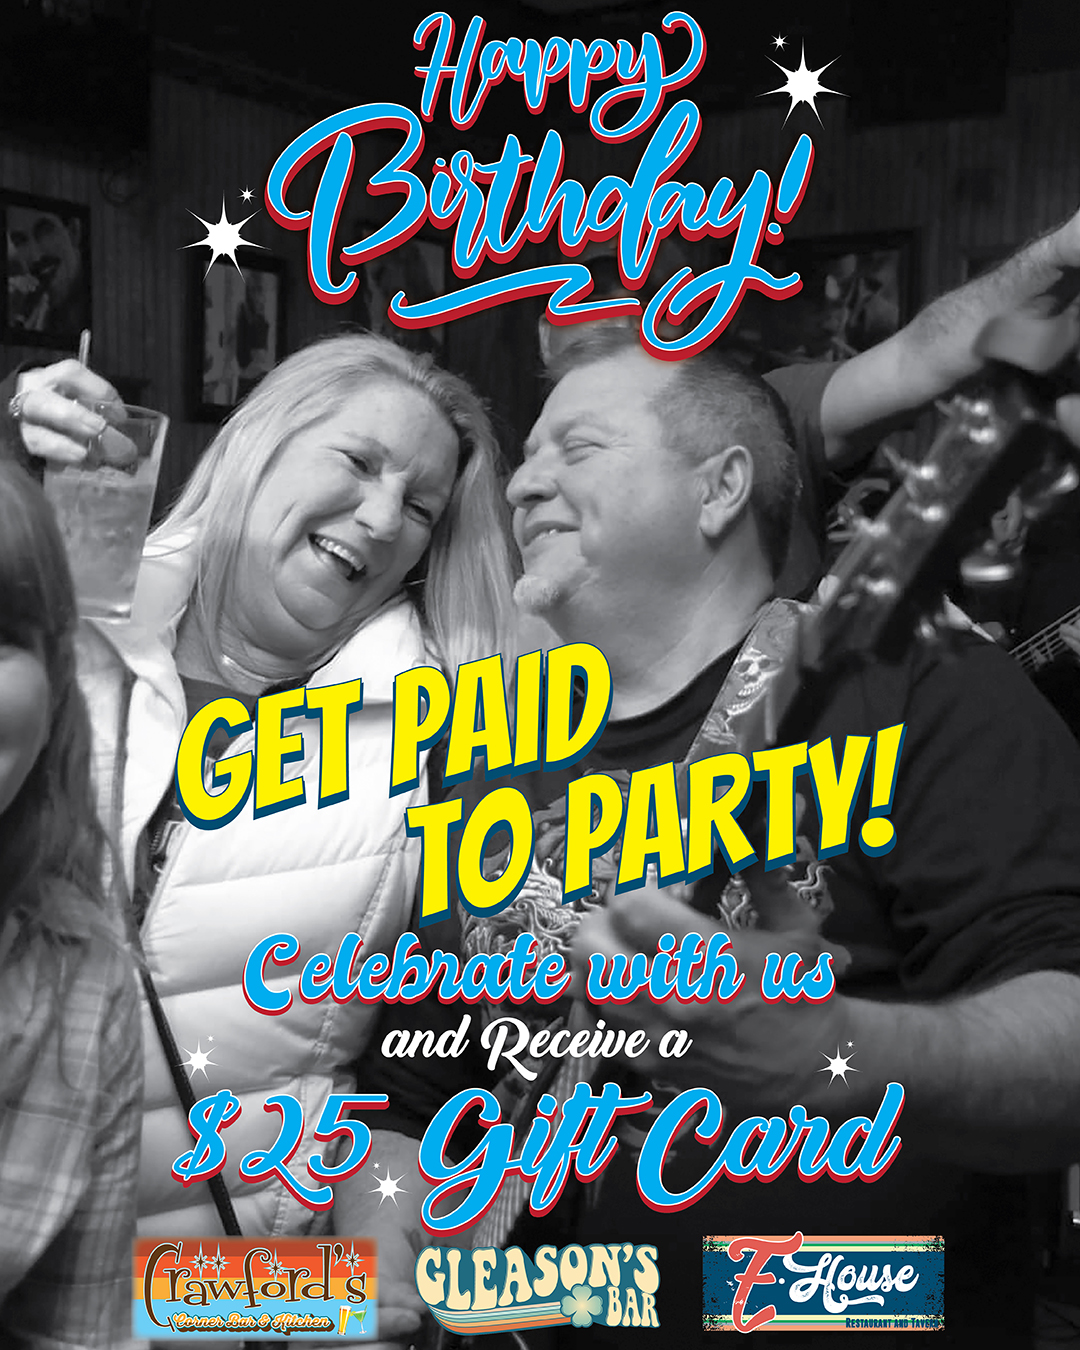 Happy birthday get paid to party with a gift card.